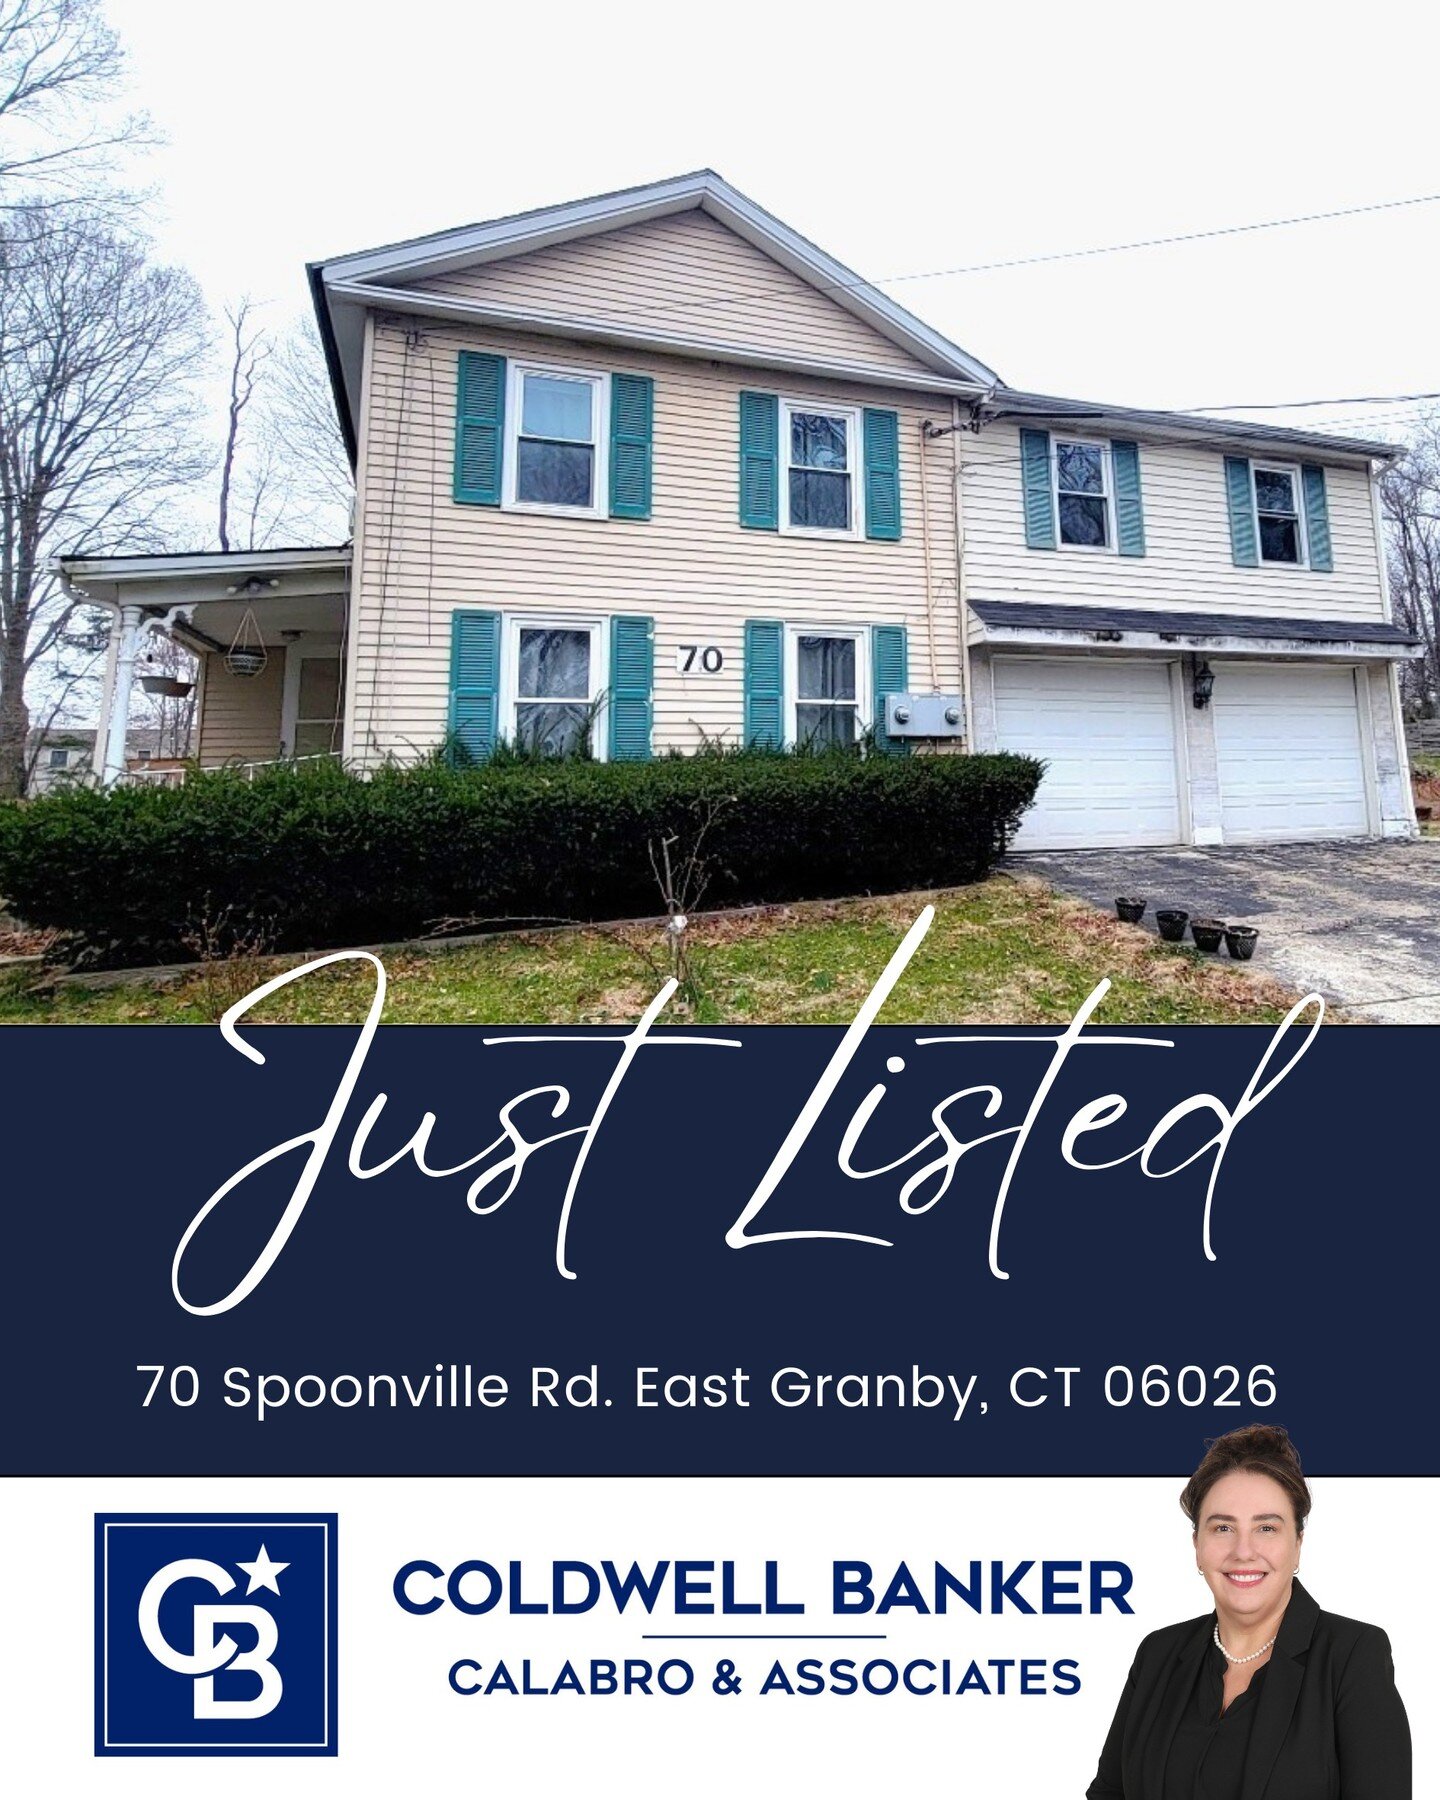 Congratulations to Barbara on her new listing at 70 Spoonville Rd. in East Granby! 🏡

Hard-to-find two-family home in East Granby. Lots of big-time potential awaits! This 2,923 square-foot, 12-room, 6-bed, 3-full-bath home needs TLC and is priced ac